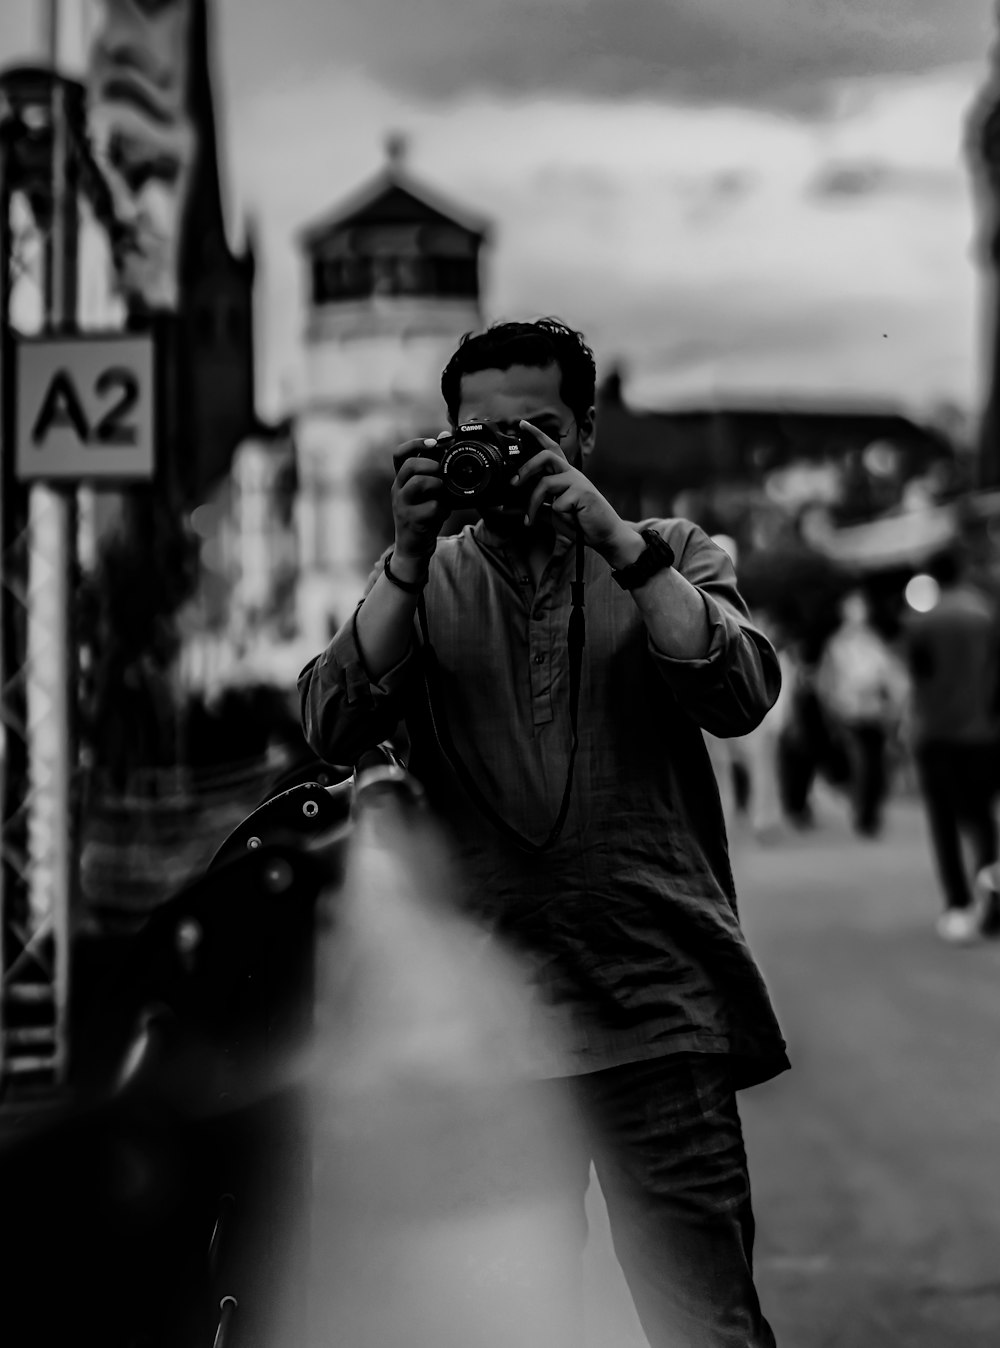 a man taking a picture of himself with a camera